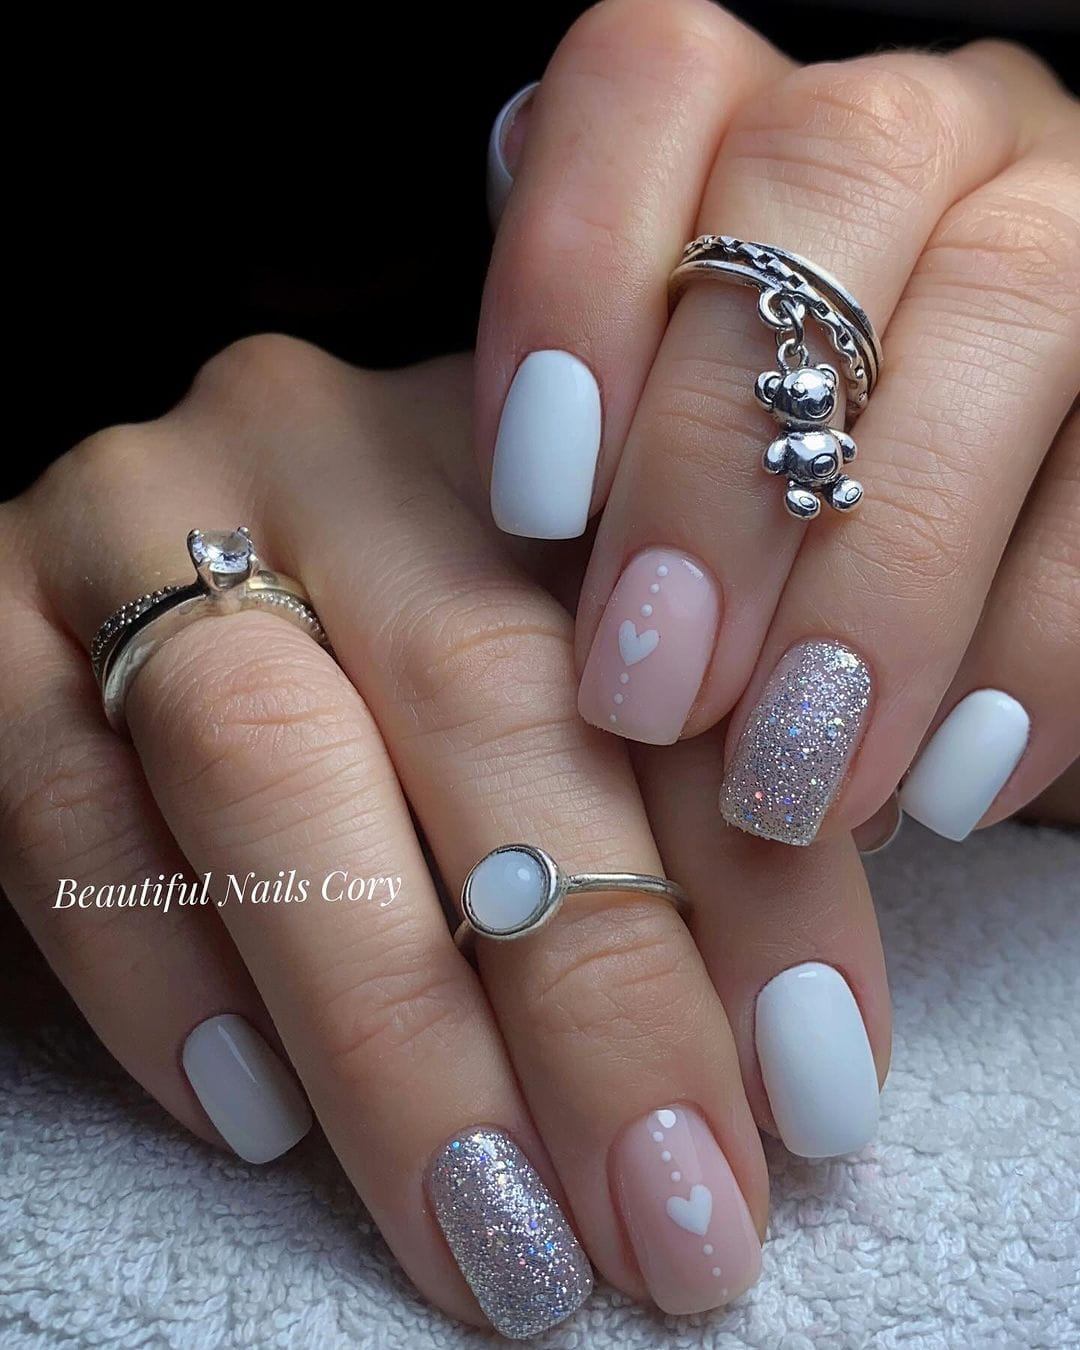 100 Of The Best Spring Inspired Nail Designs images 18